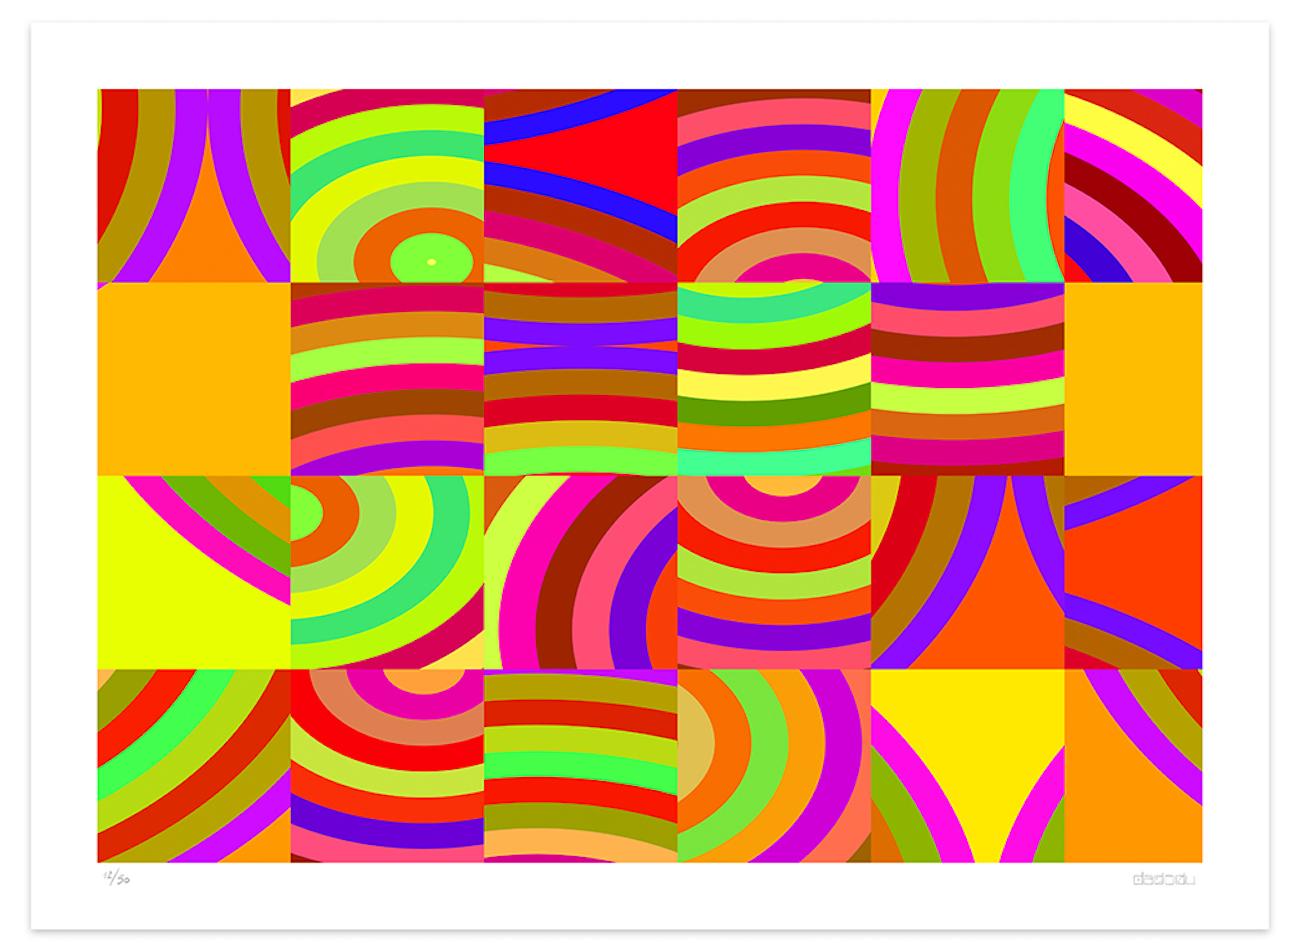 Image dimensions 49 x 70 cm

Candy Wrapper 1 is a beautiful giclée print realized by the contemporary artist Dadodu in 2009.

This original artwork is divided into squares filled with mismatching colorful shapes.

Hand-signed on the lower right